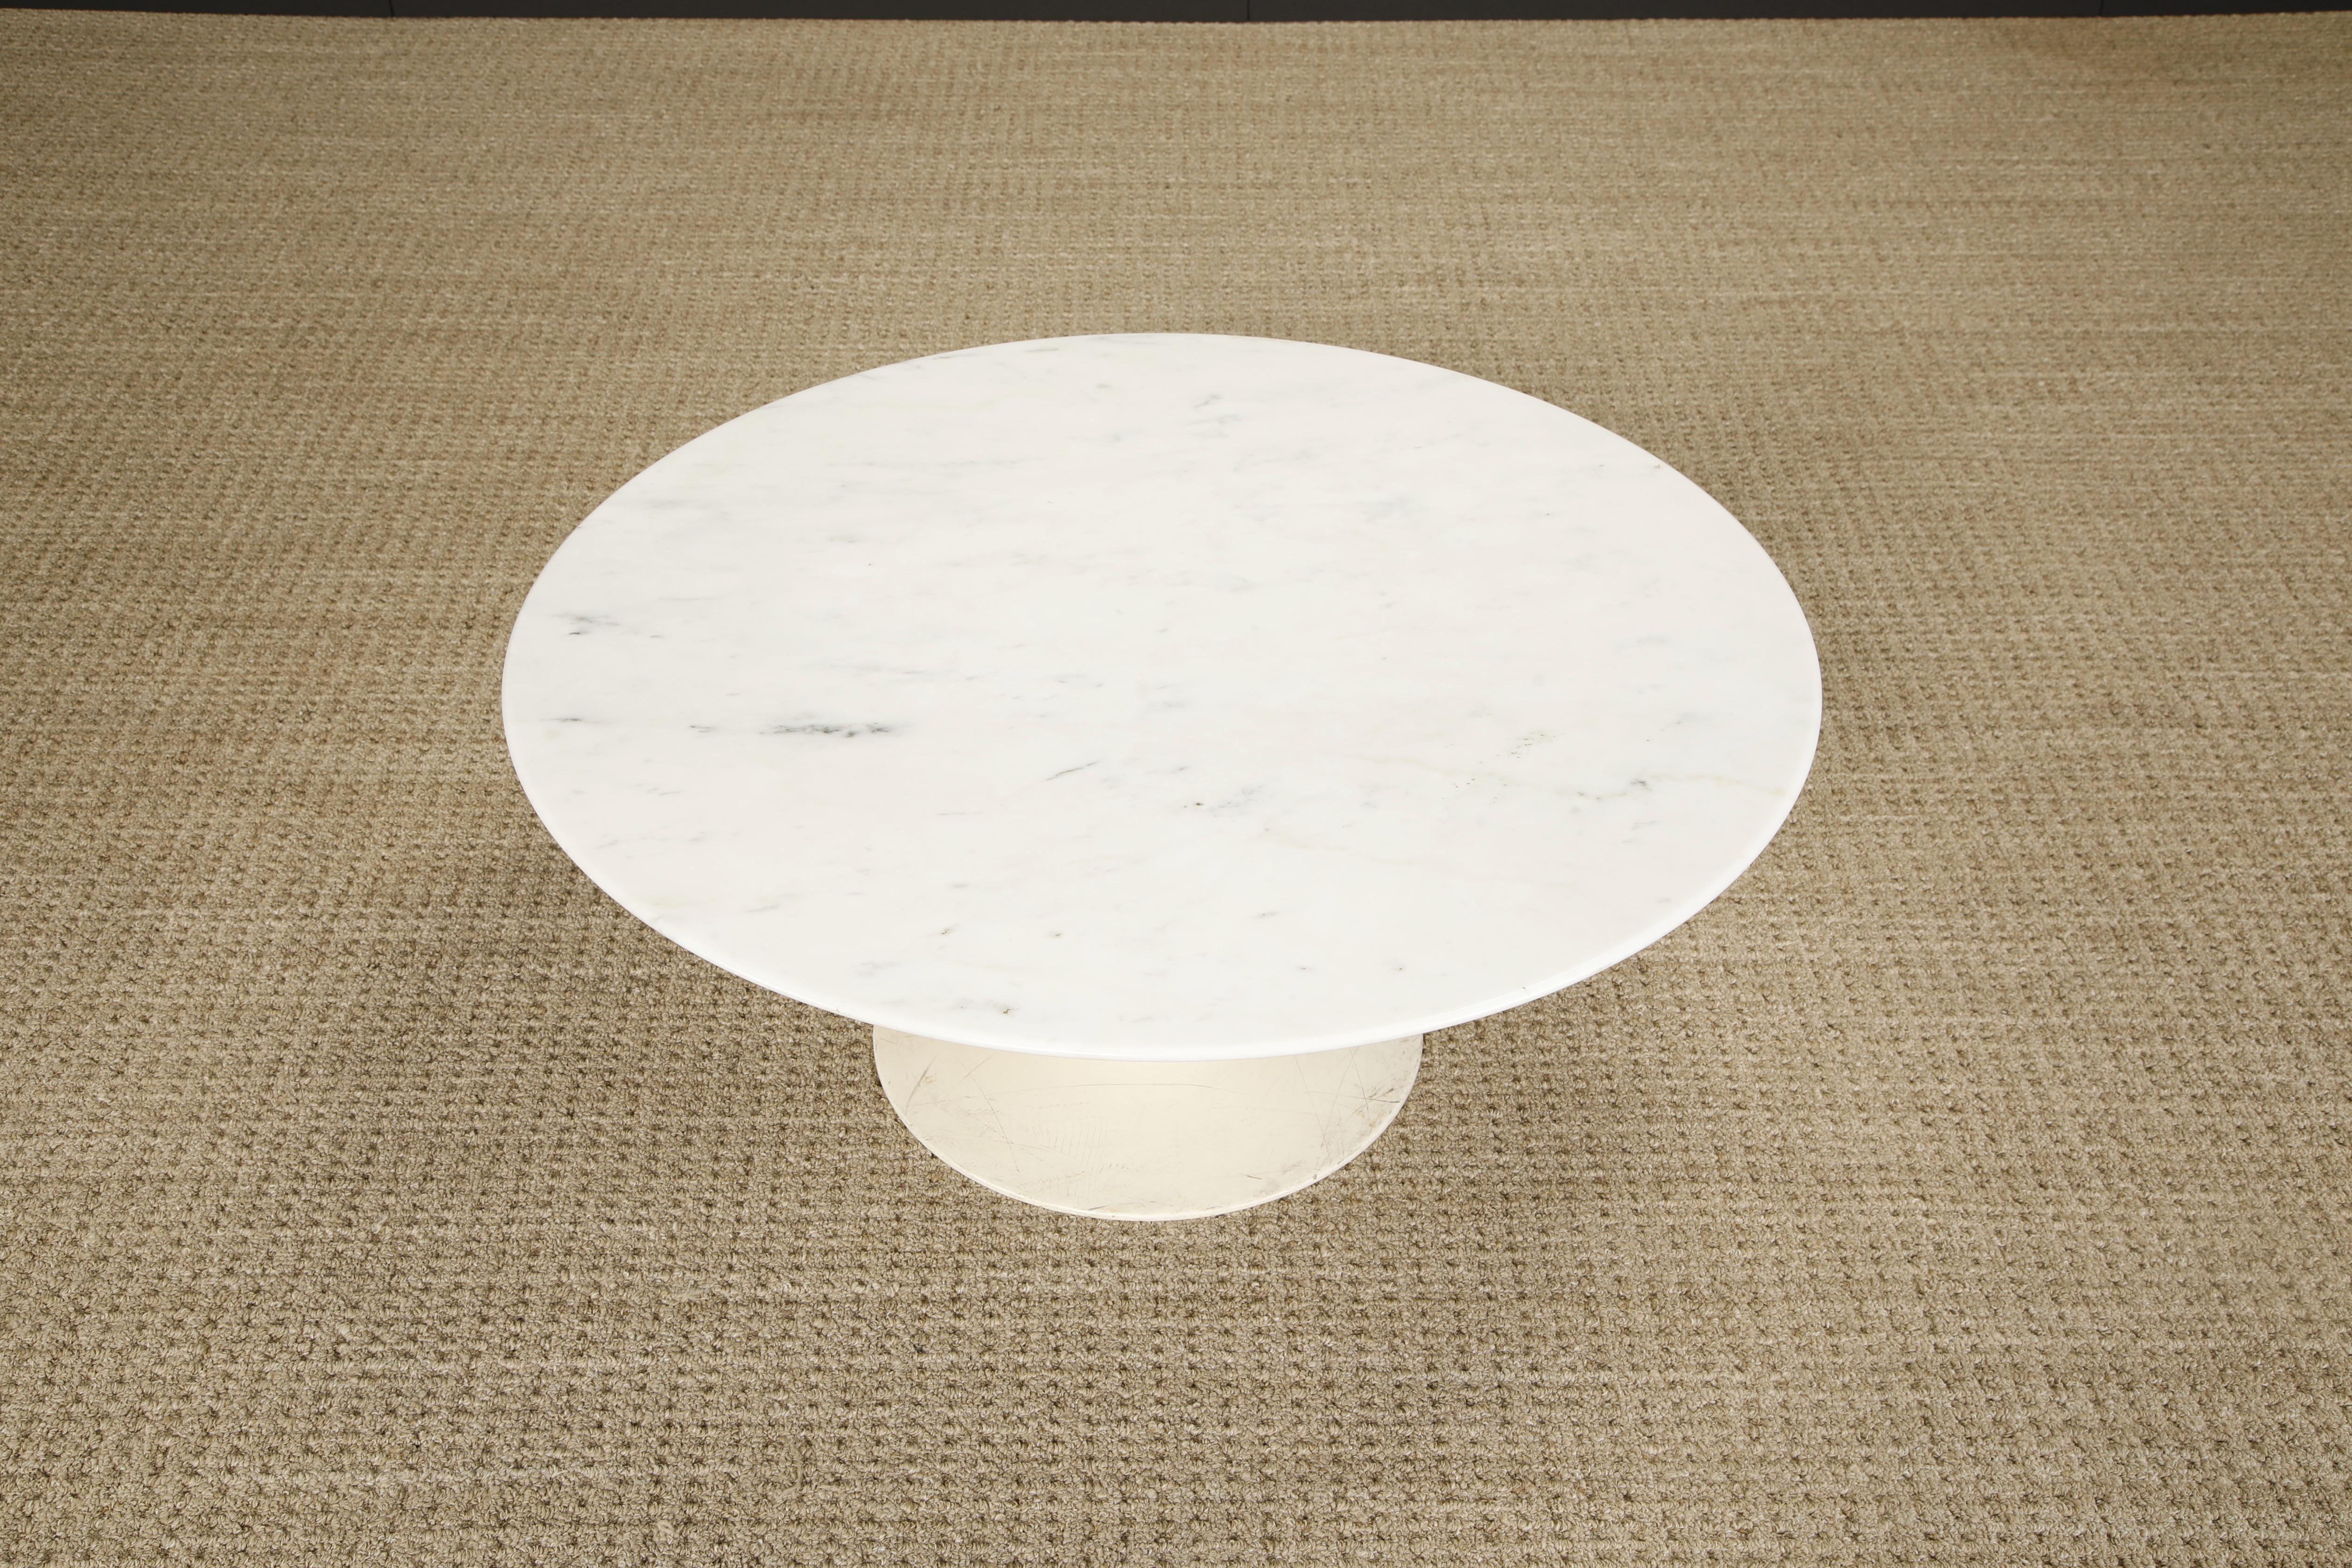 Carrara Marble Early Production Knoll Associates Marble Tulip Coffee Table, c 1959, Signed